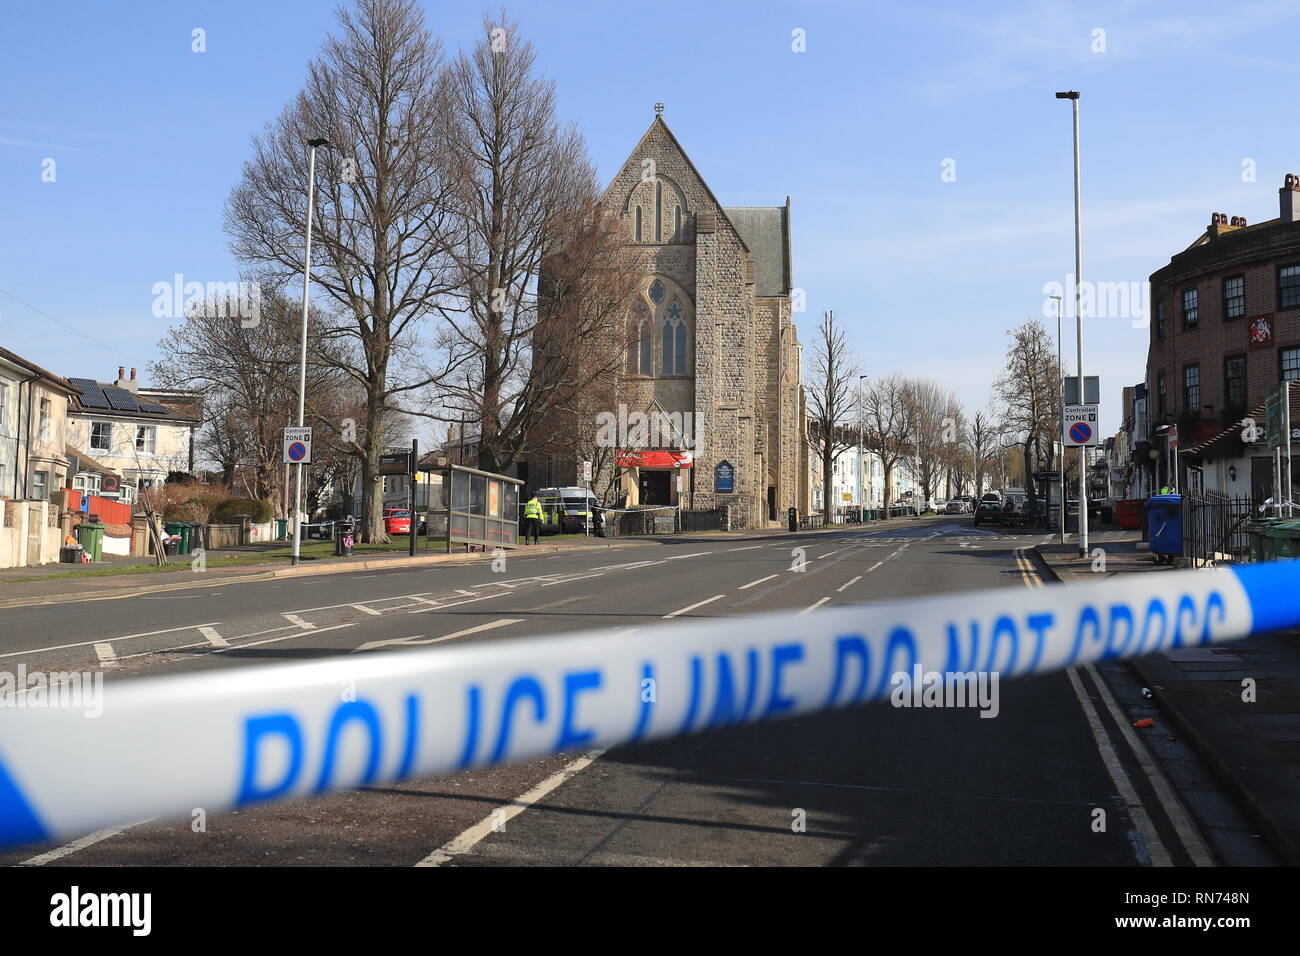 Police tape at a crime scene near St Joseph's Church in Brighton. The brother of two British teenagers killed fighting for Islamists in Syria has died in hospital after being stabbed in a car after it crashed in the city, police said. Stock Photo